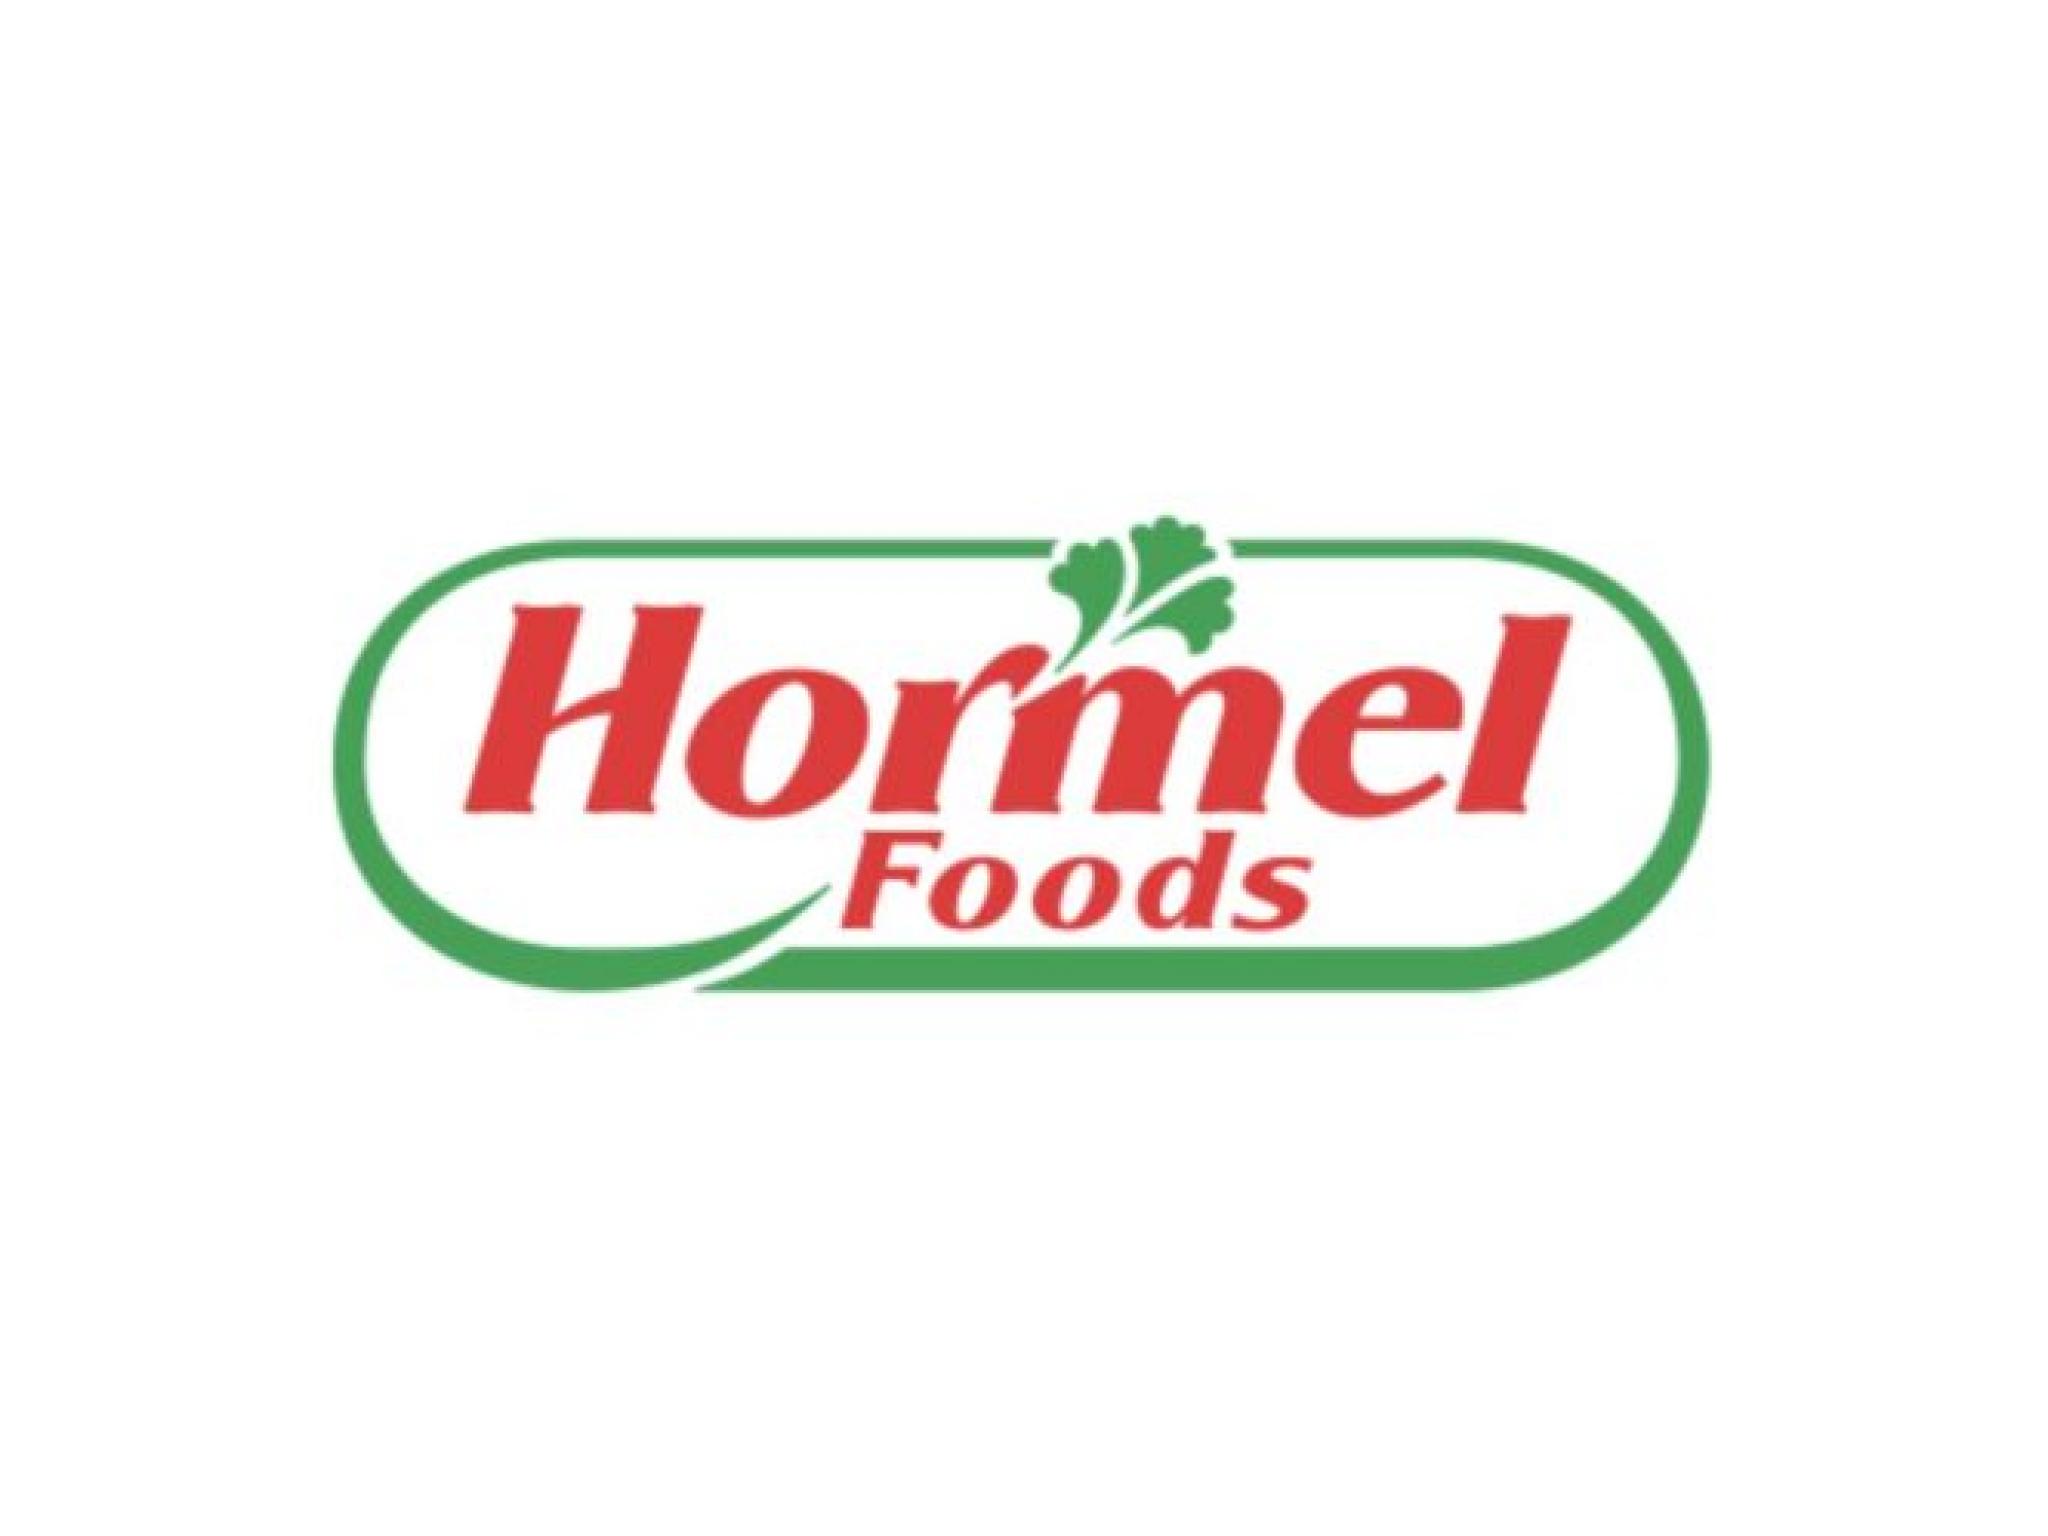  how-to-earn-500-a-month-from-hormel-foods-stock-following-q2-results 